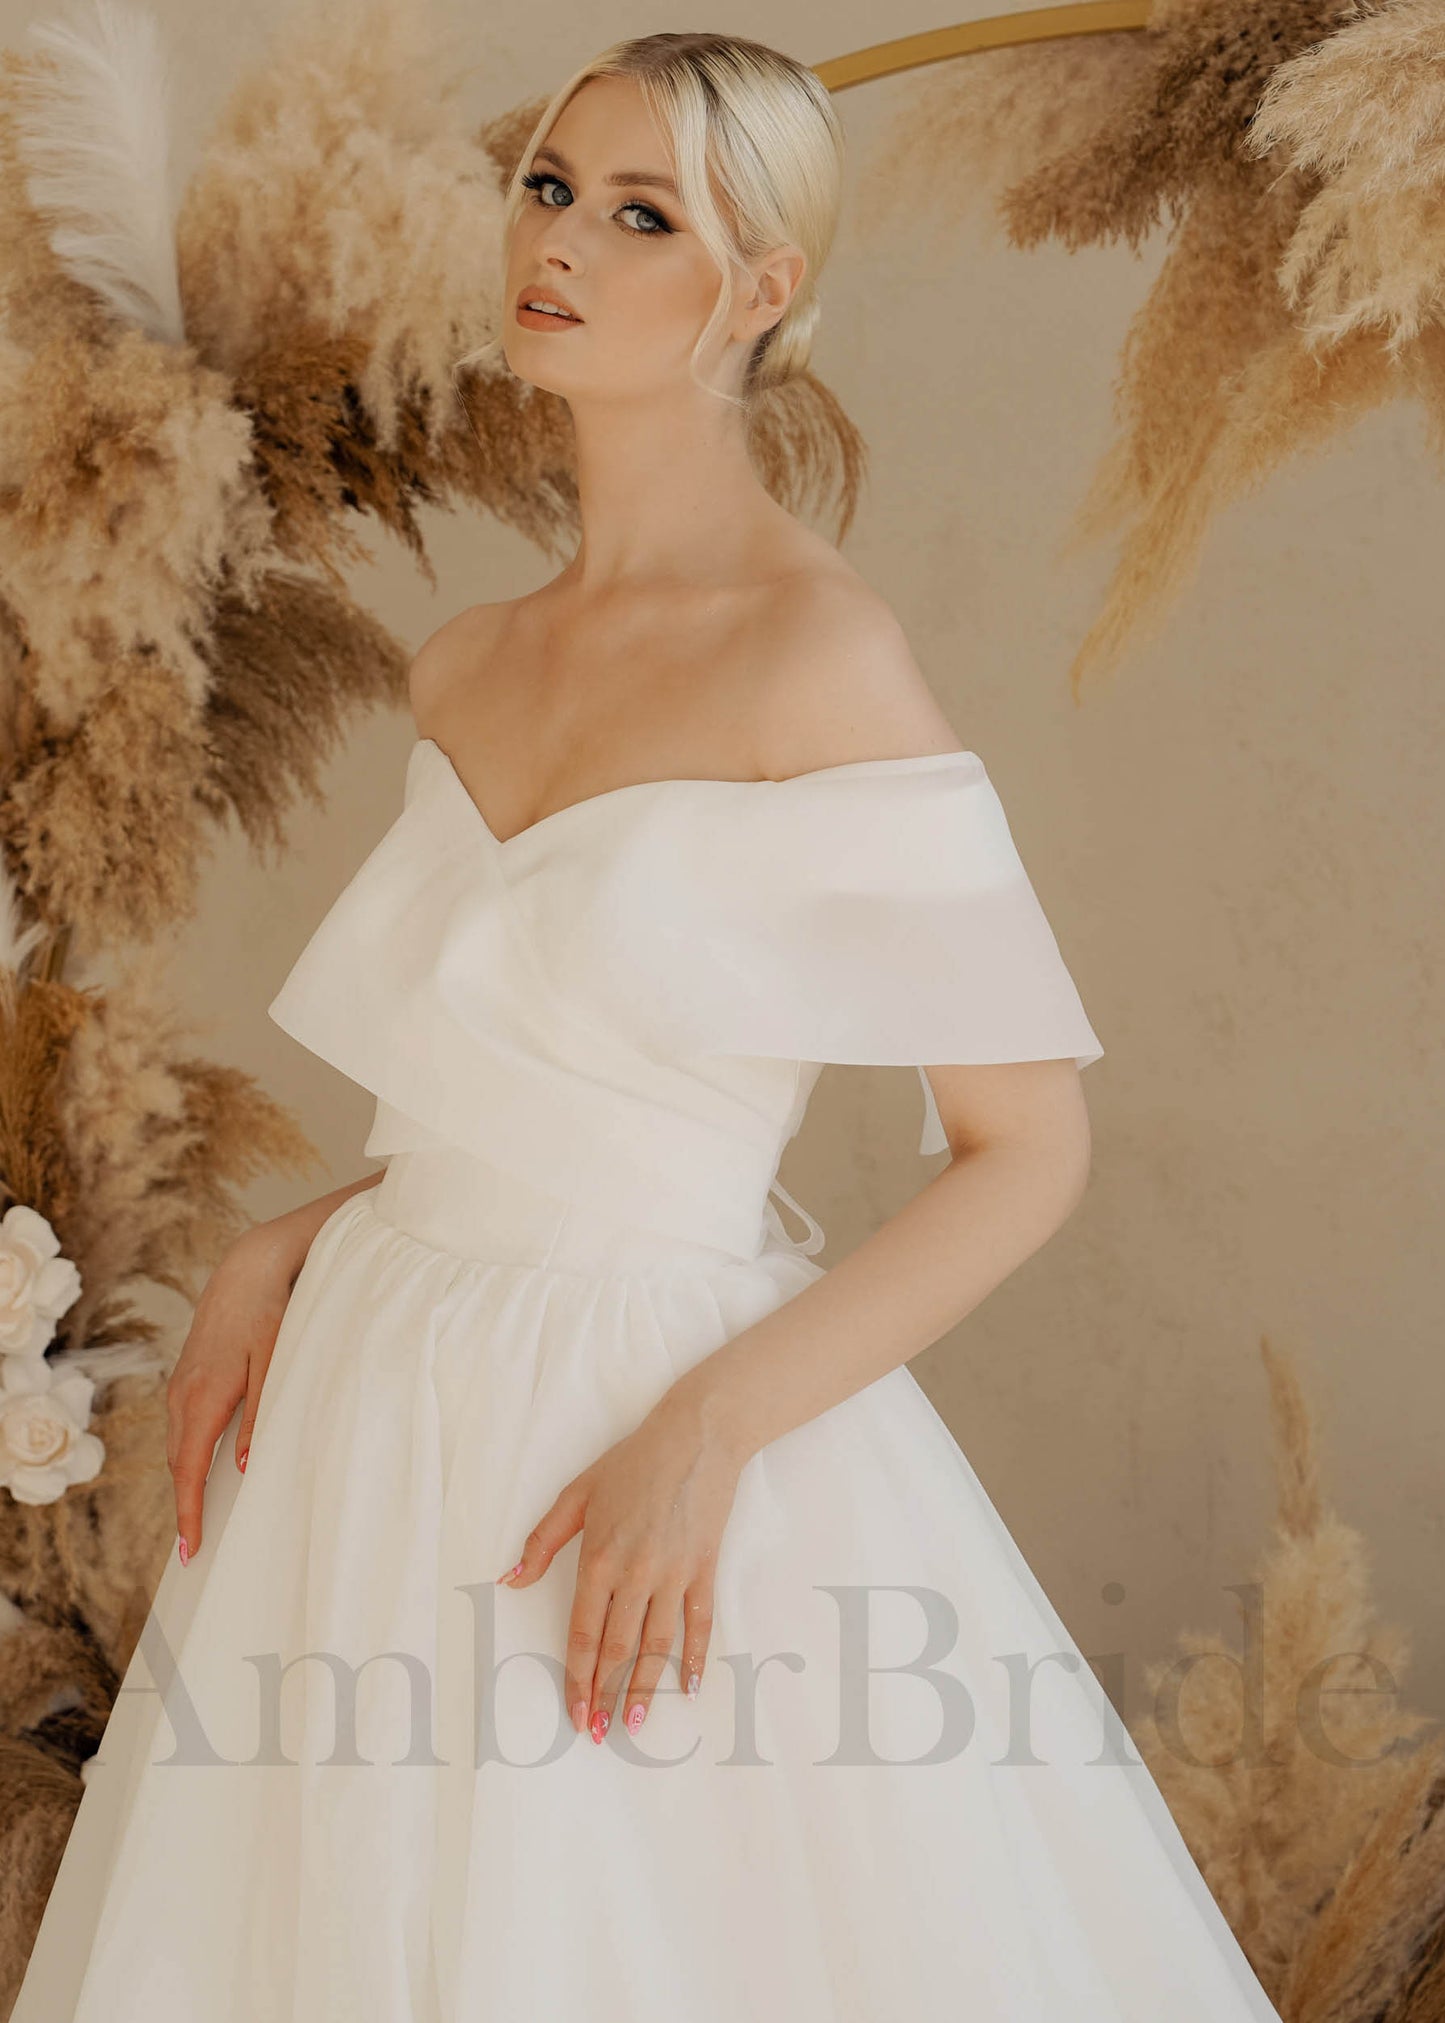 Simple Ball Gown Organza Wedding Dress with Off Shoulder Design